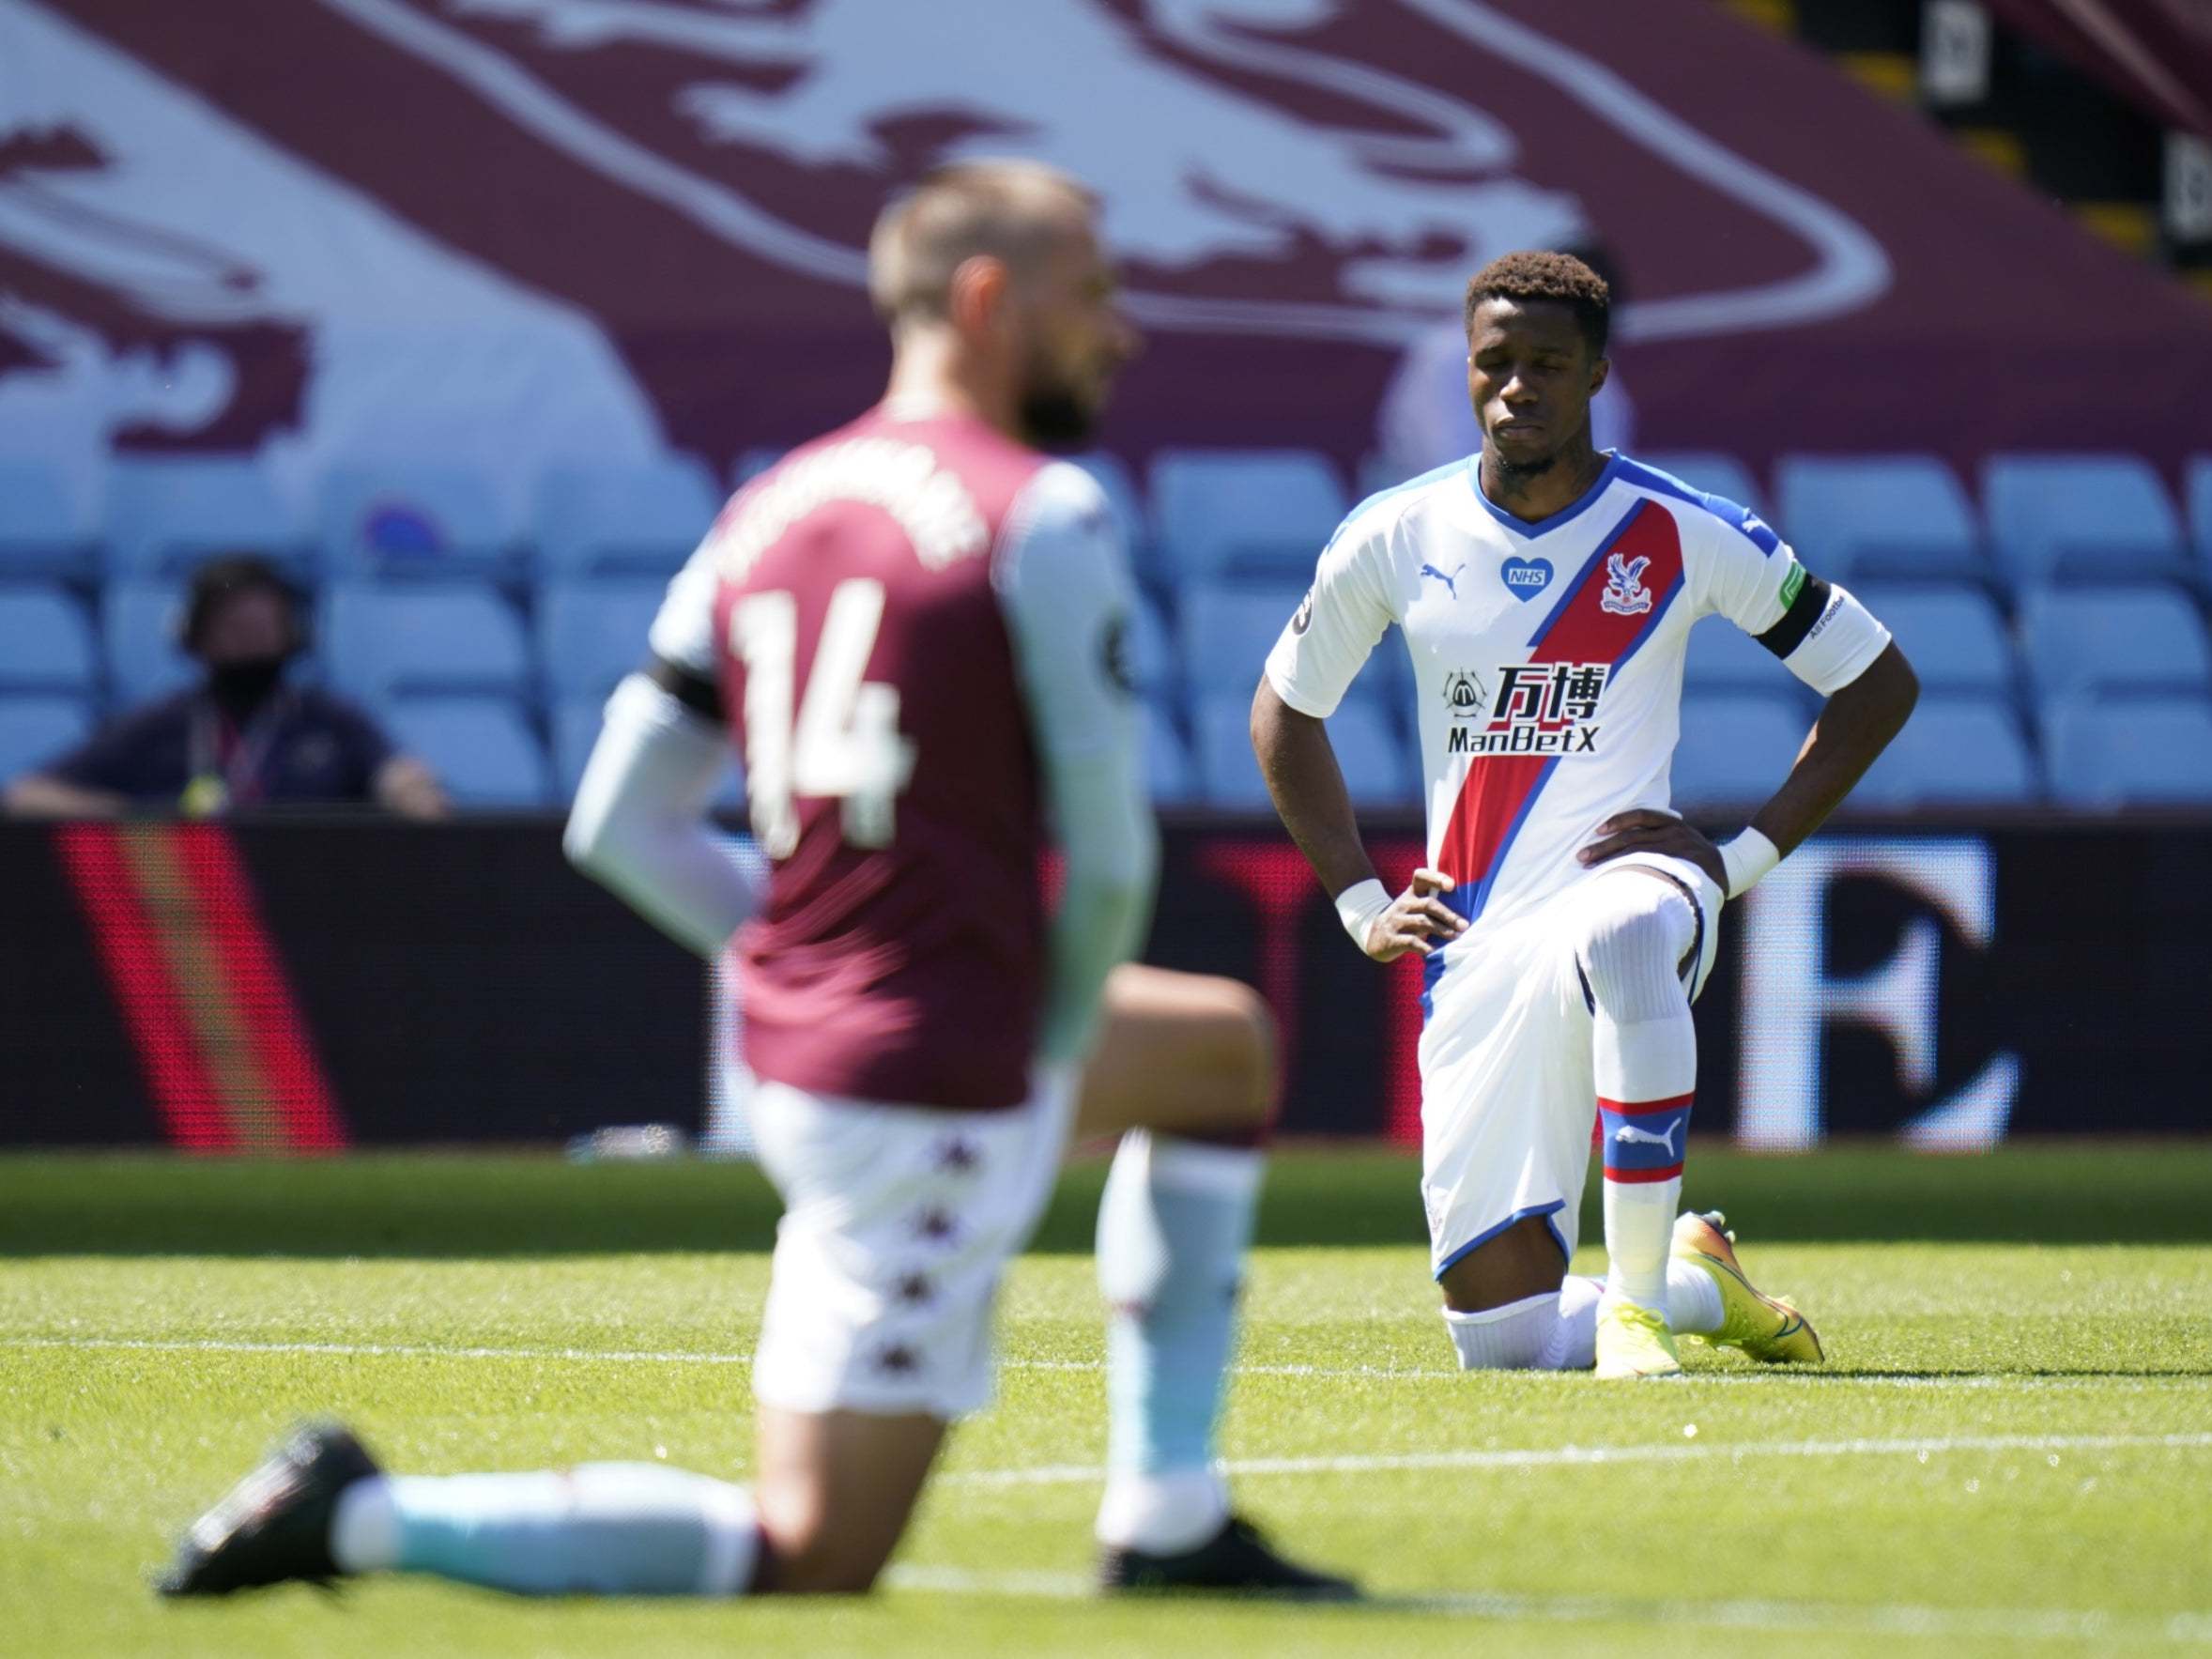 Wilfried Zaha was subjected to racial abuse before Crystal Palace's game against Aston Villa